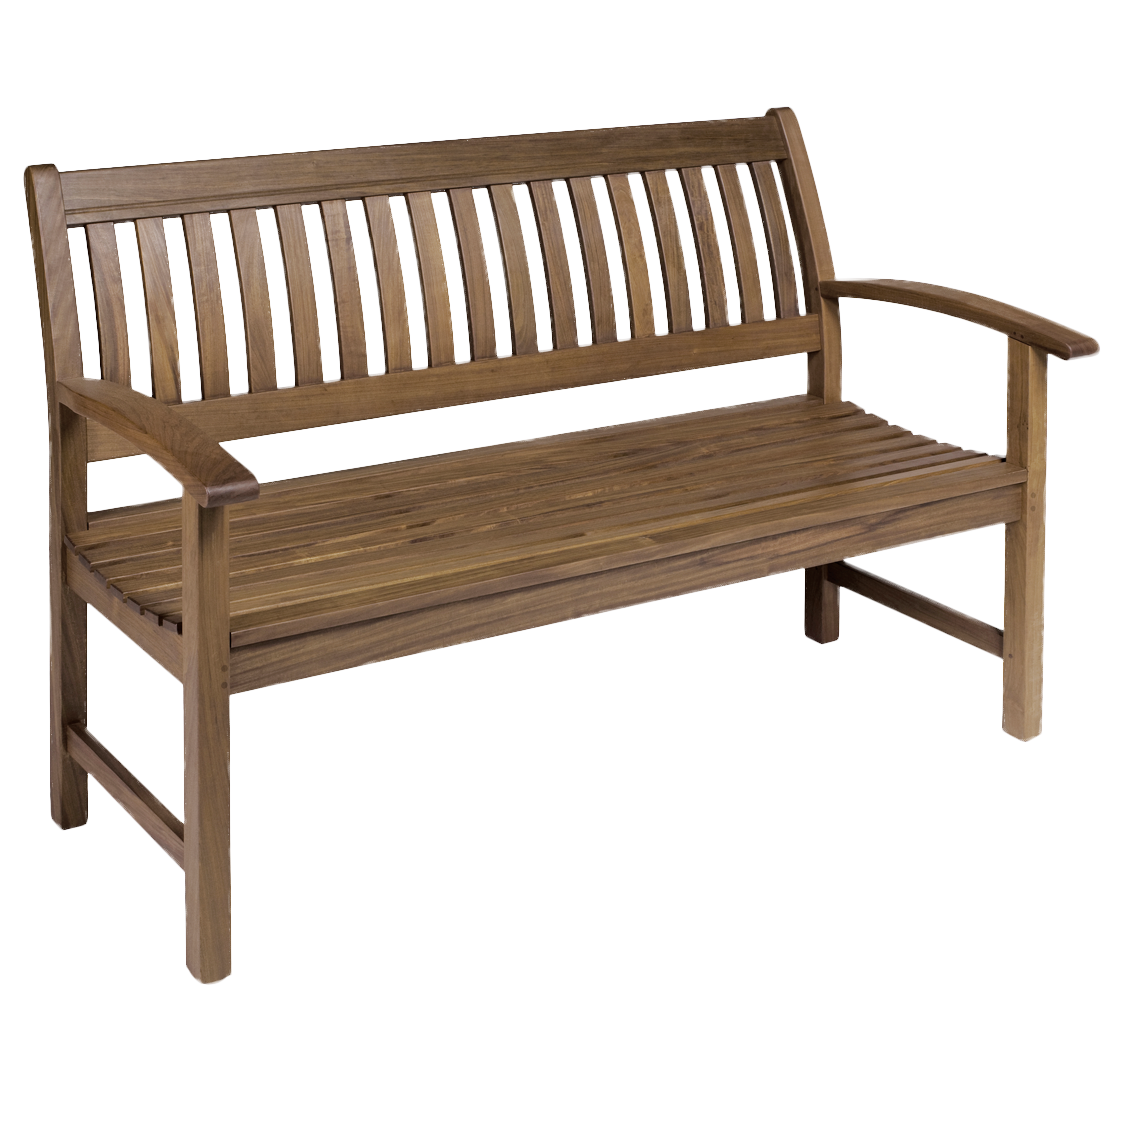 Heritage 55" Garden Bench with Arms